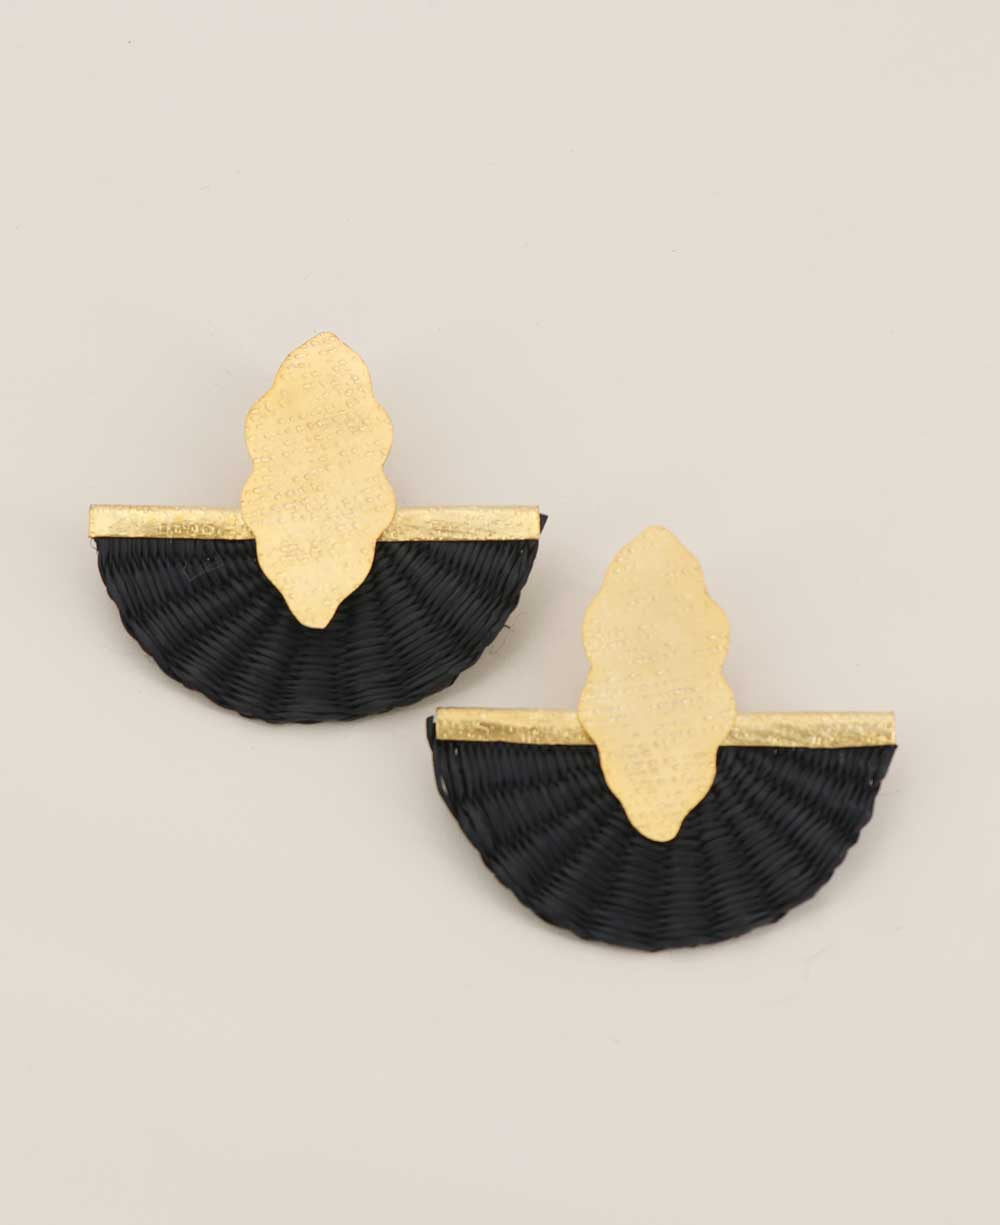 Colombian iraca palm earrings with gold plating